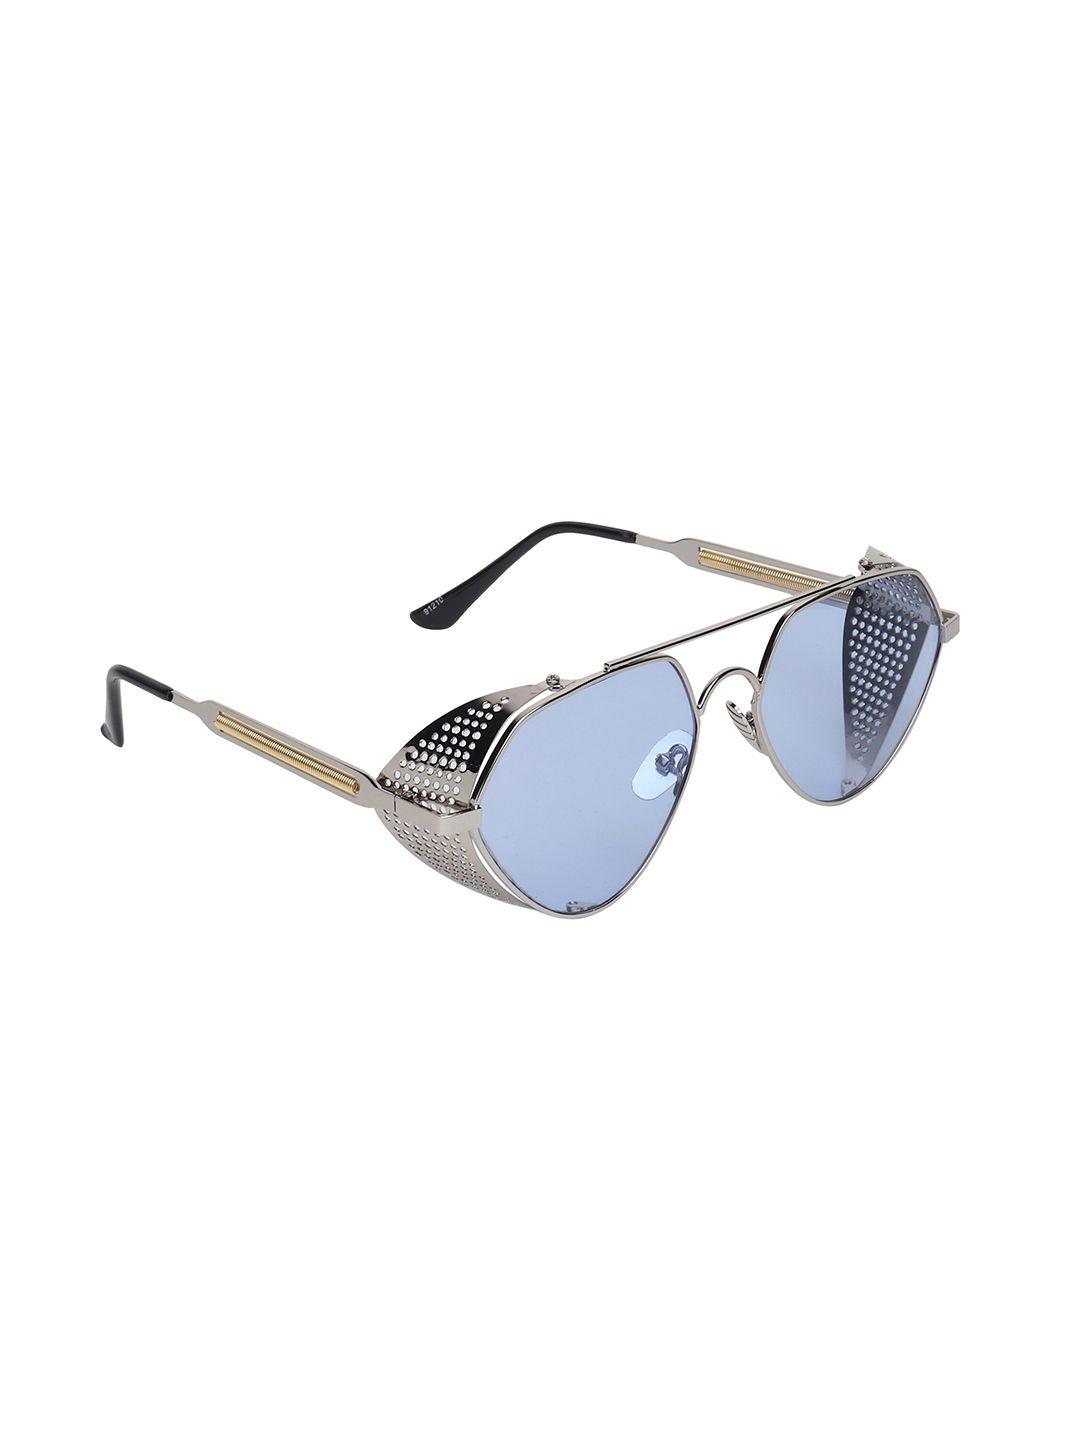 swiss design oval sunglasses with uv protected lens sdsg-91210-05